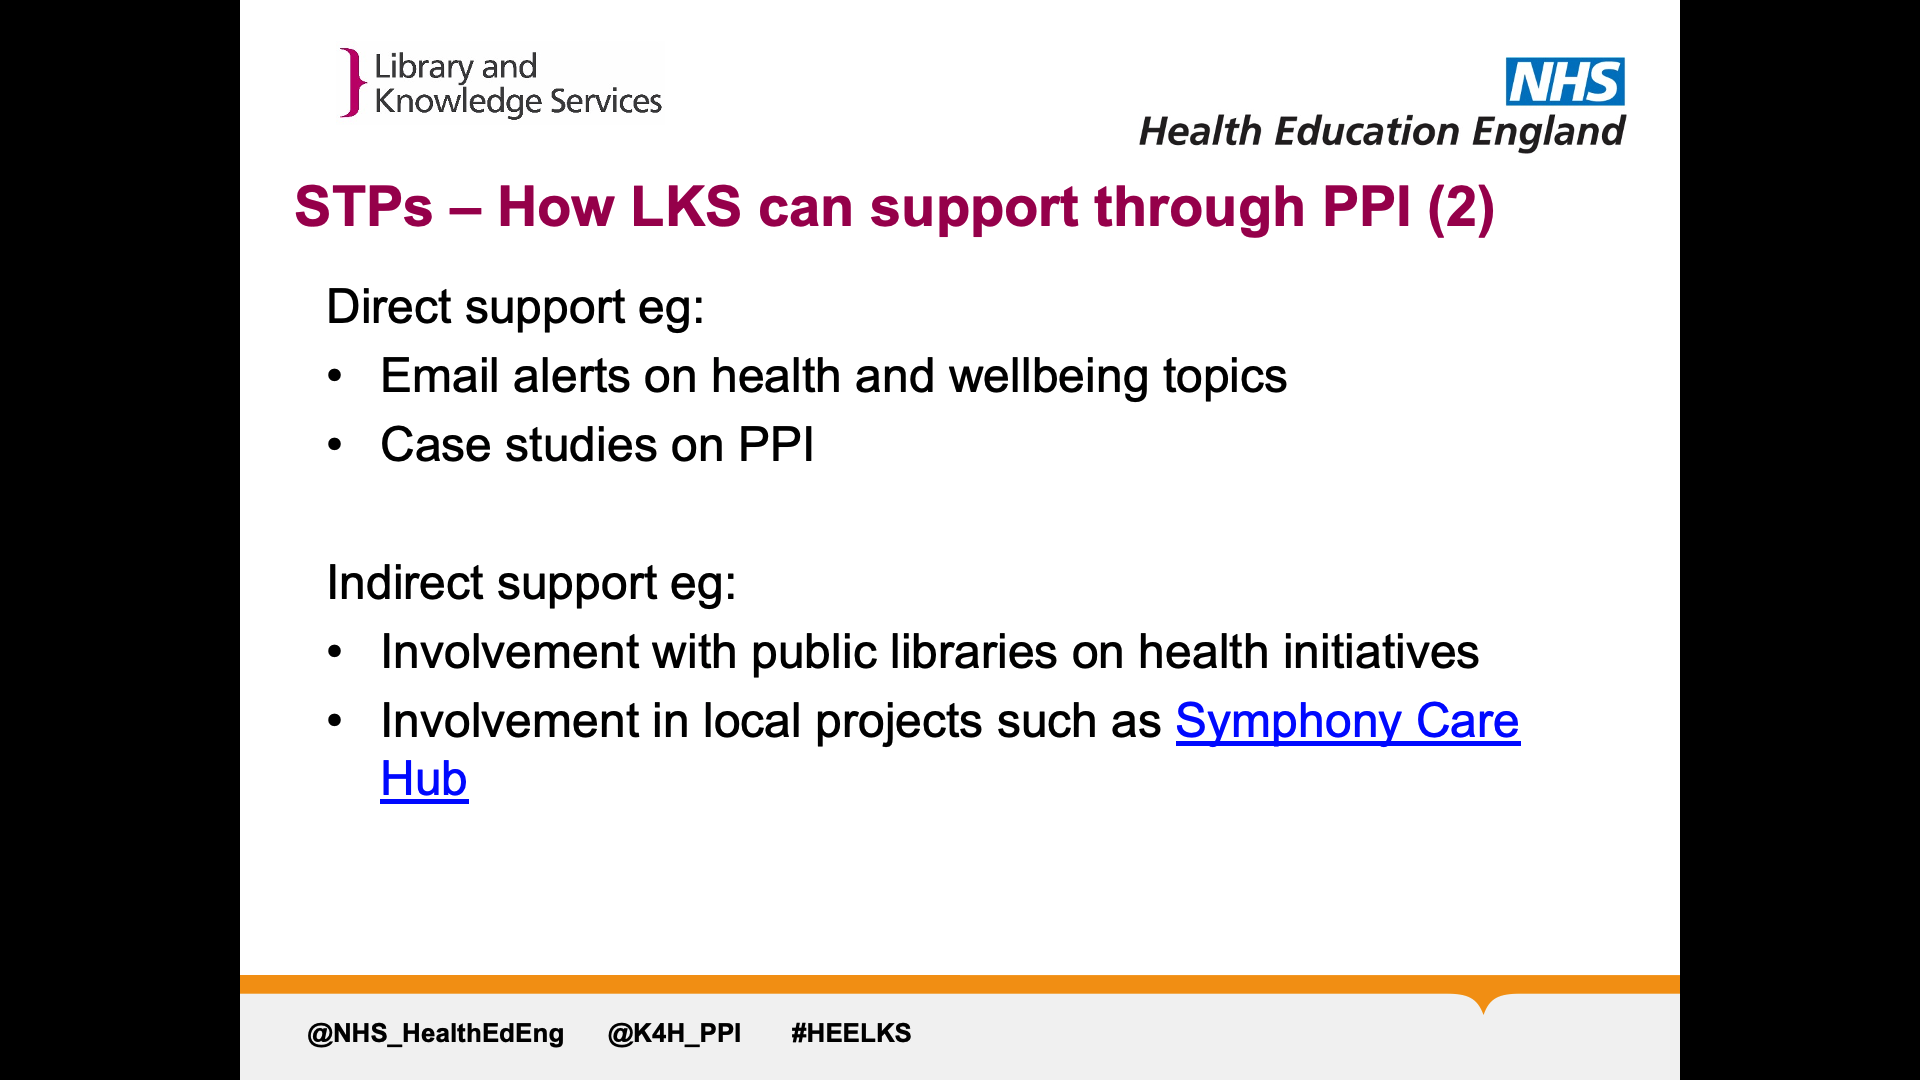 Title: STPs – How LKS can support through PPI (2) Text on page: Direct support eg: Email alerts on health and wellbeing topics Case studies on PPI  Indirect support eg: Involvement with public libraries on health initiatives Involvement in local projects such as Symphony Care Hub